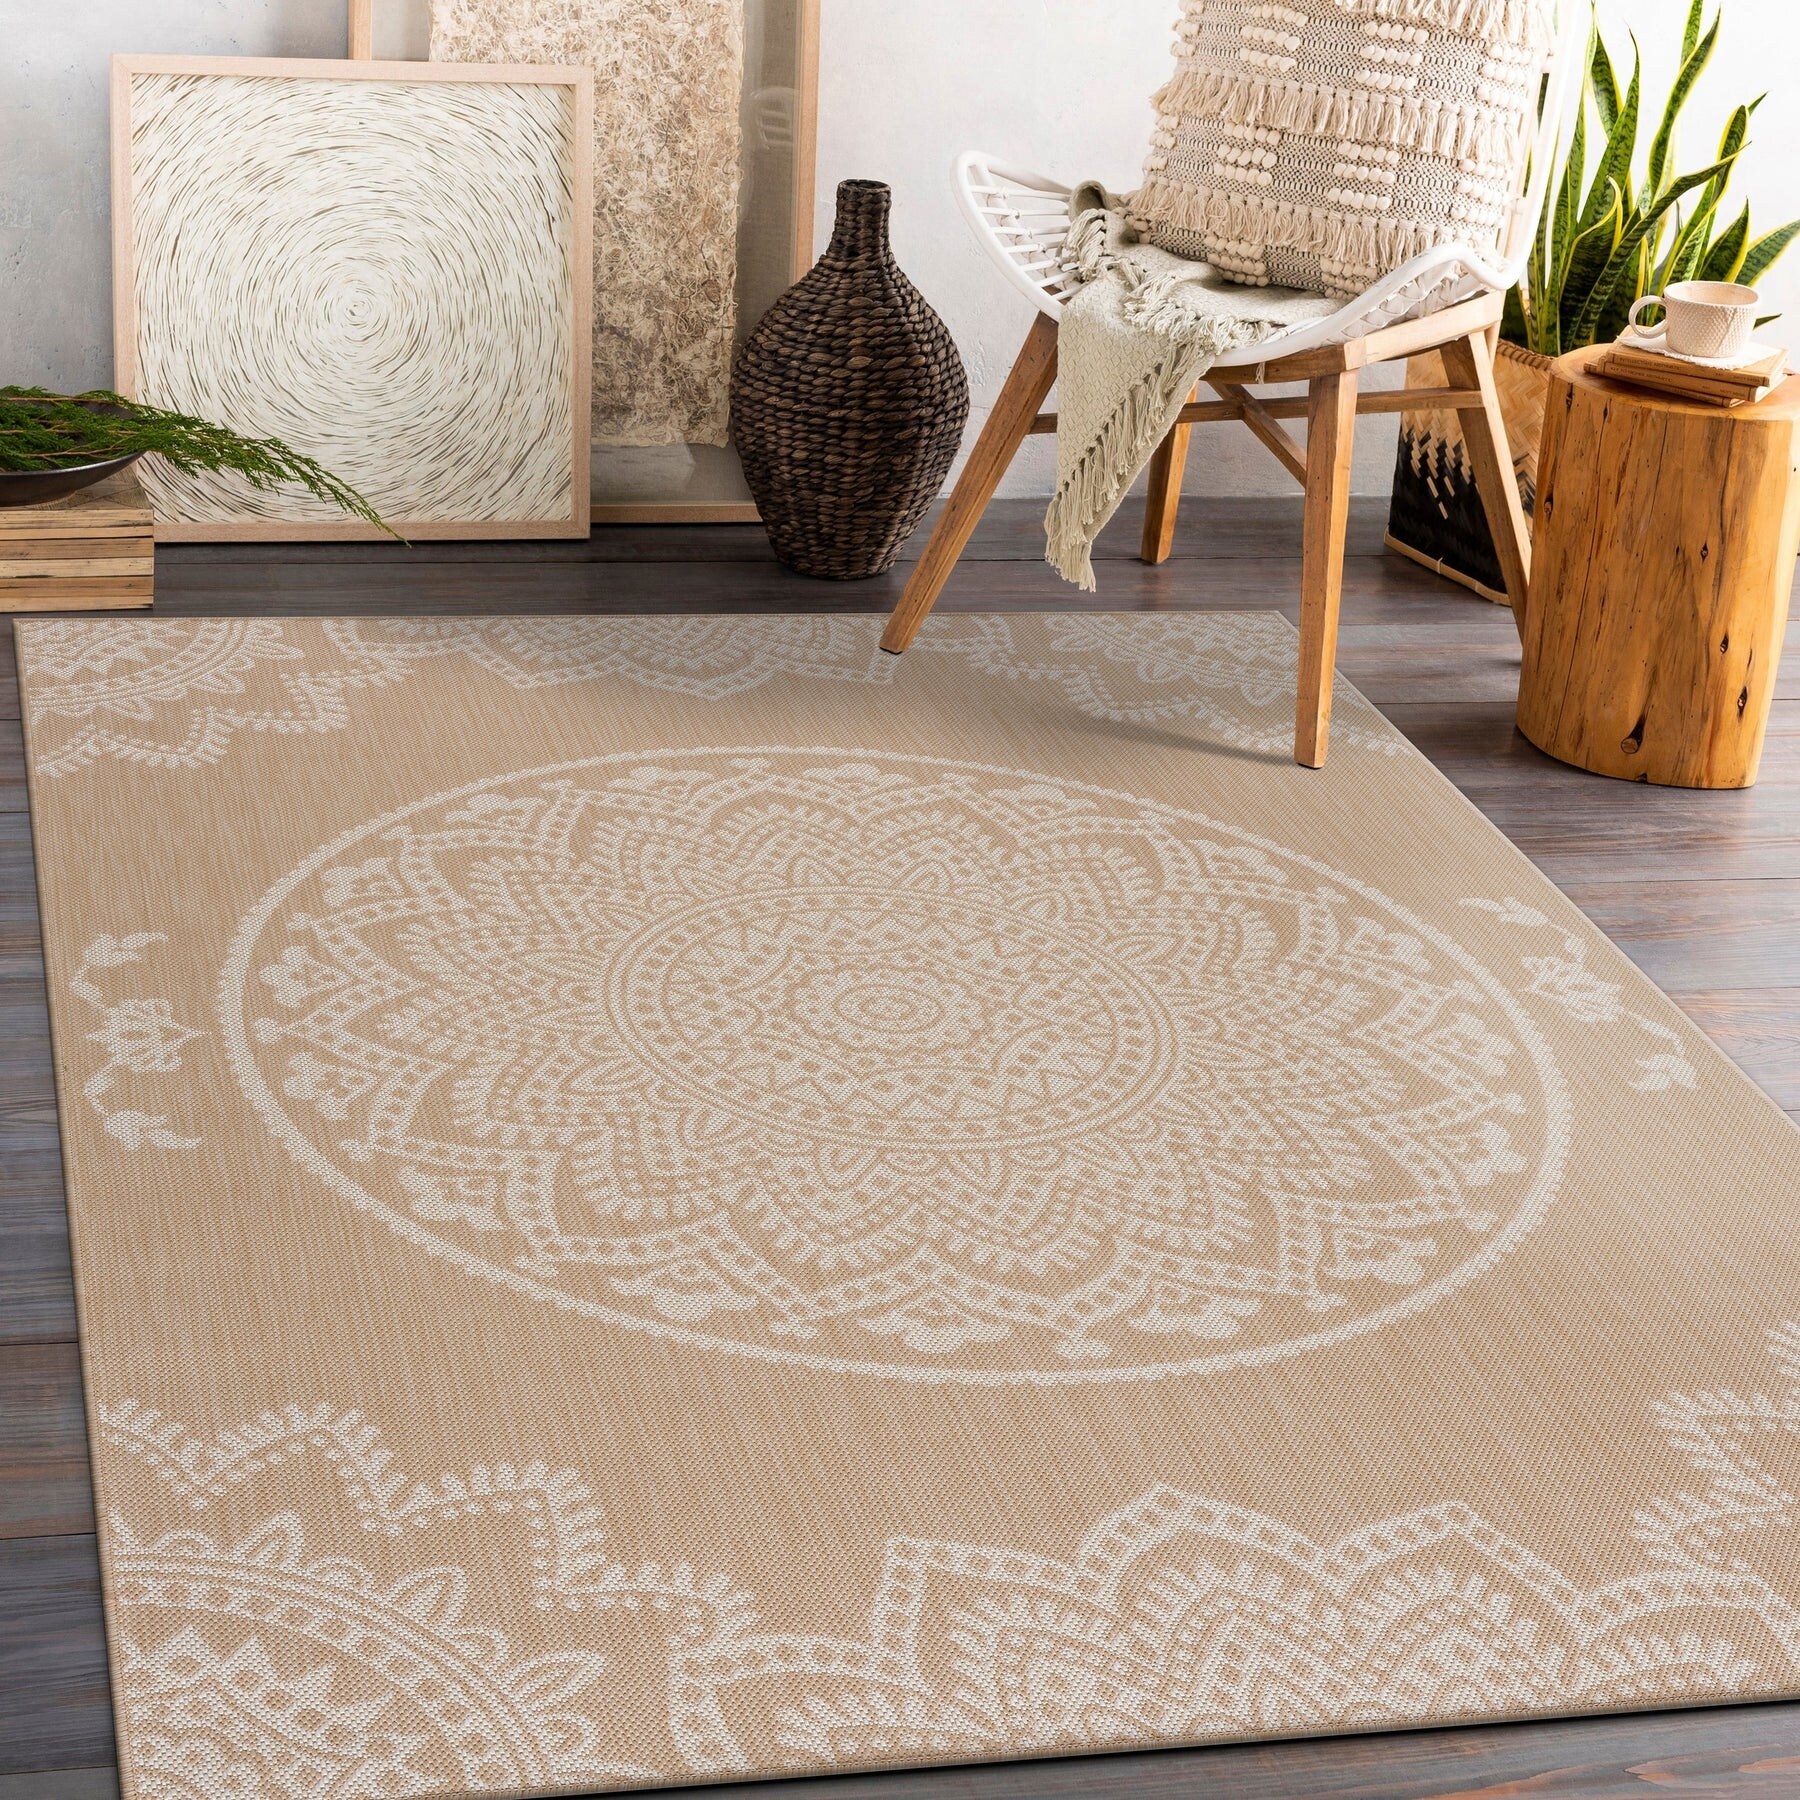 https://ak1.ostkcdn.com/images/products/is/images/direct/eb21ccd83da94707ce774ff5d6bea9281453cc47/CAMILSON-Hawaii-Beige--White-Medallion-Indoor--Outdoor-Area-Rug.jpg